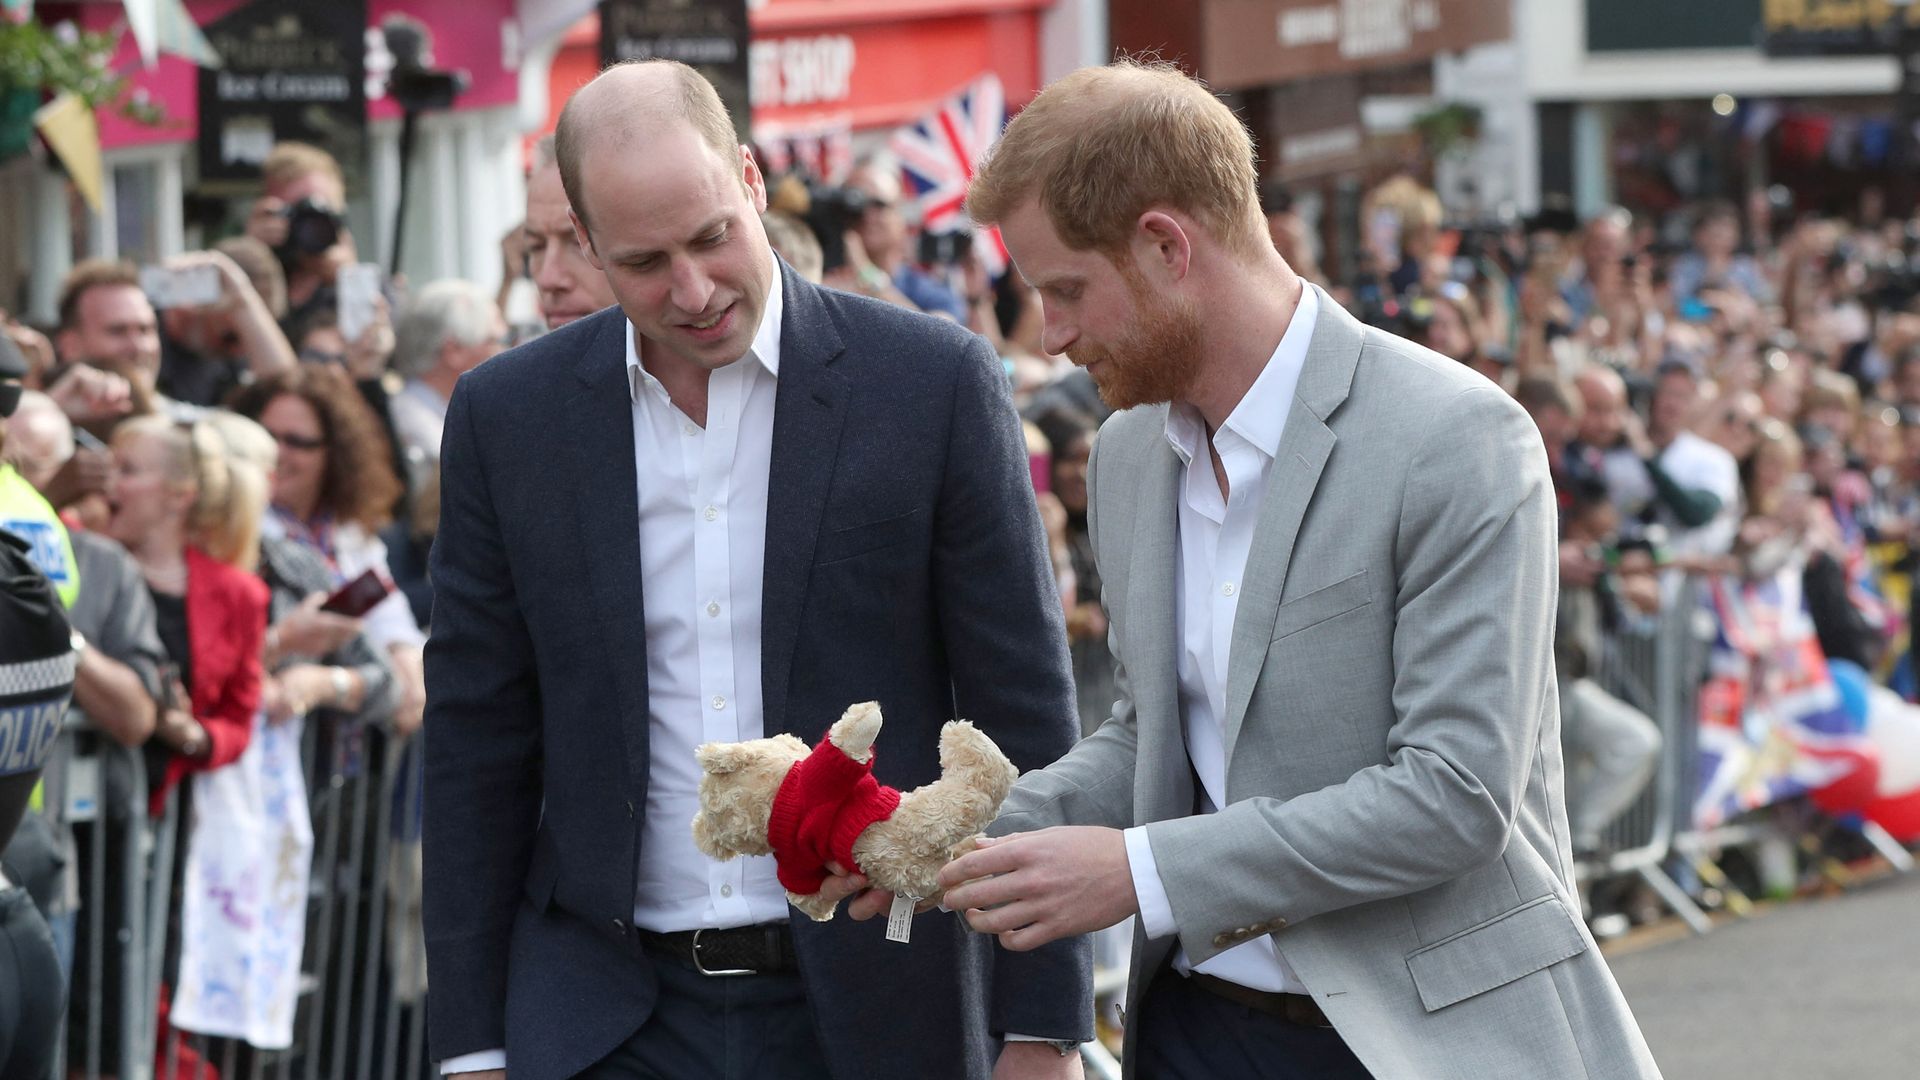 Prince William and Prince Harry looking at a teddy bear